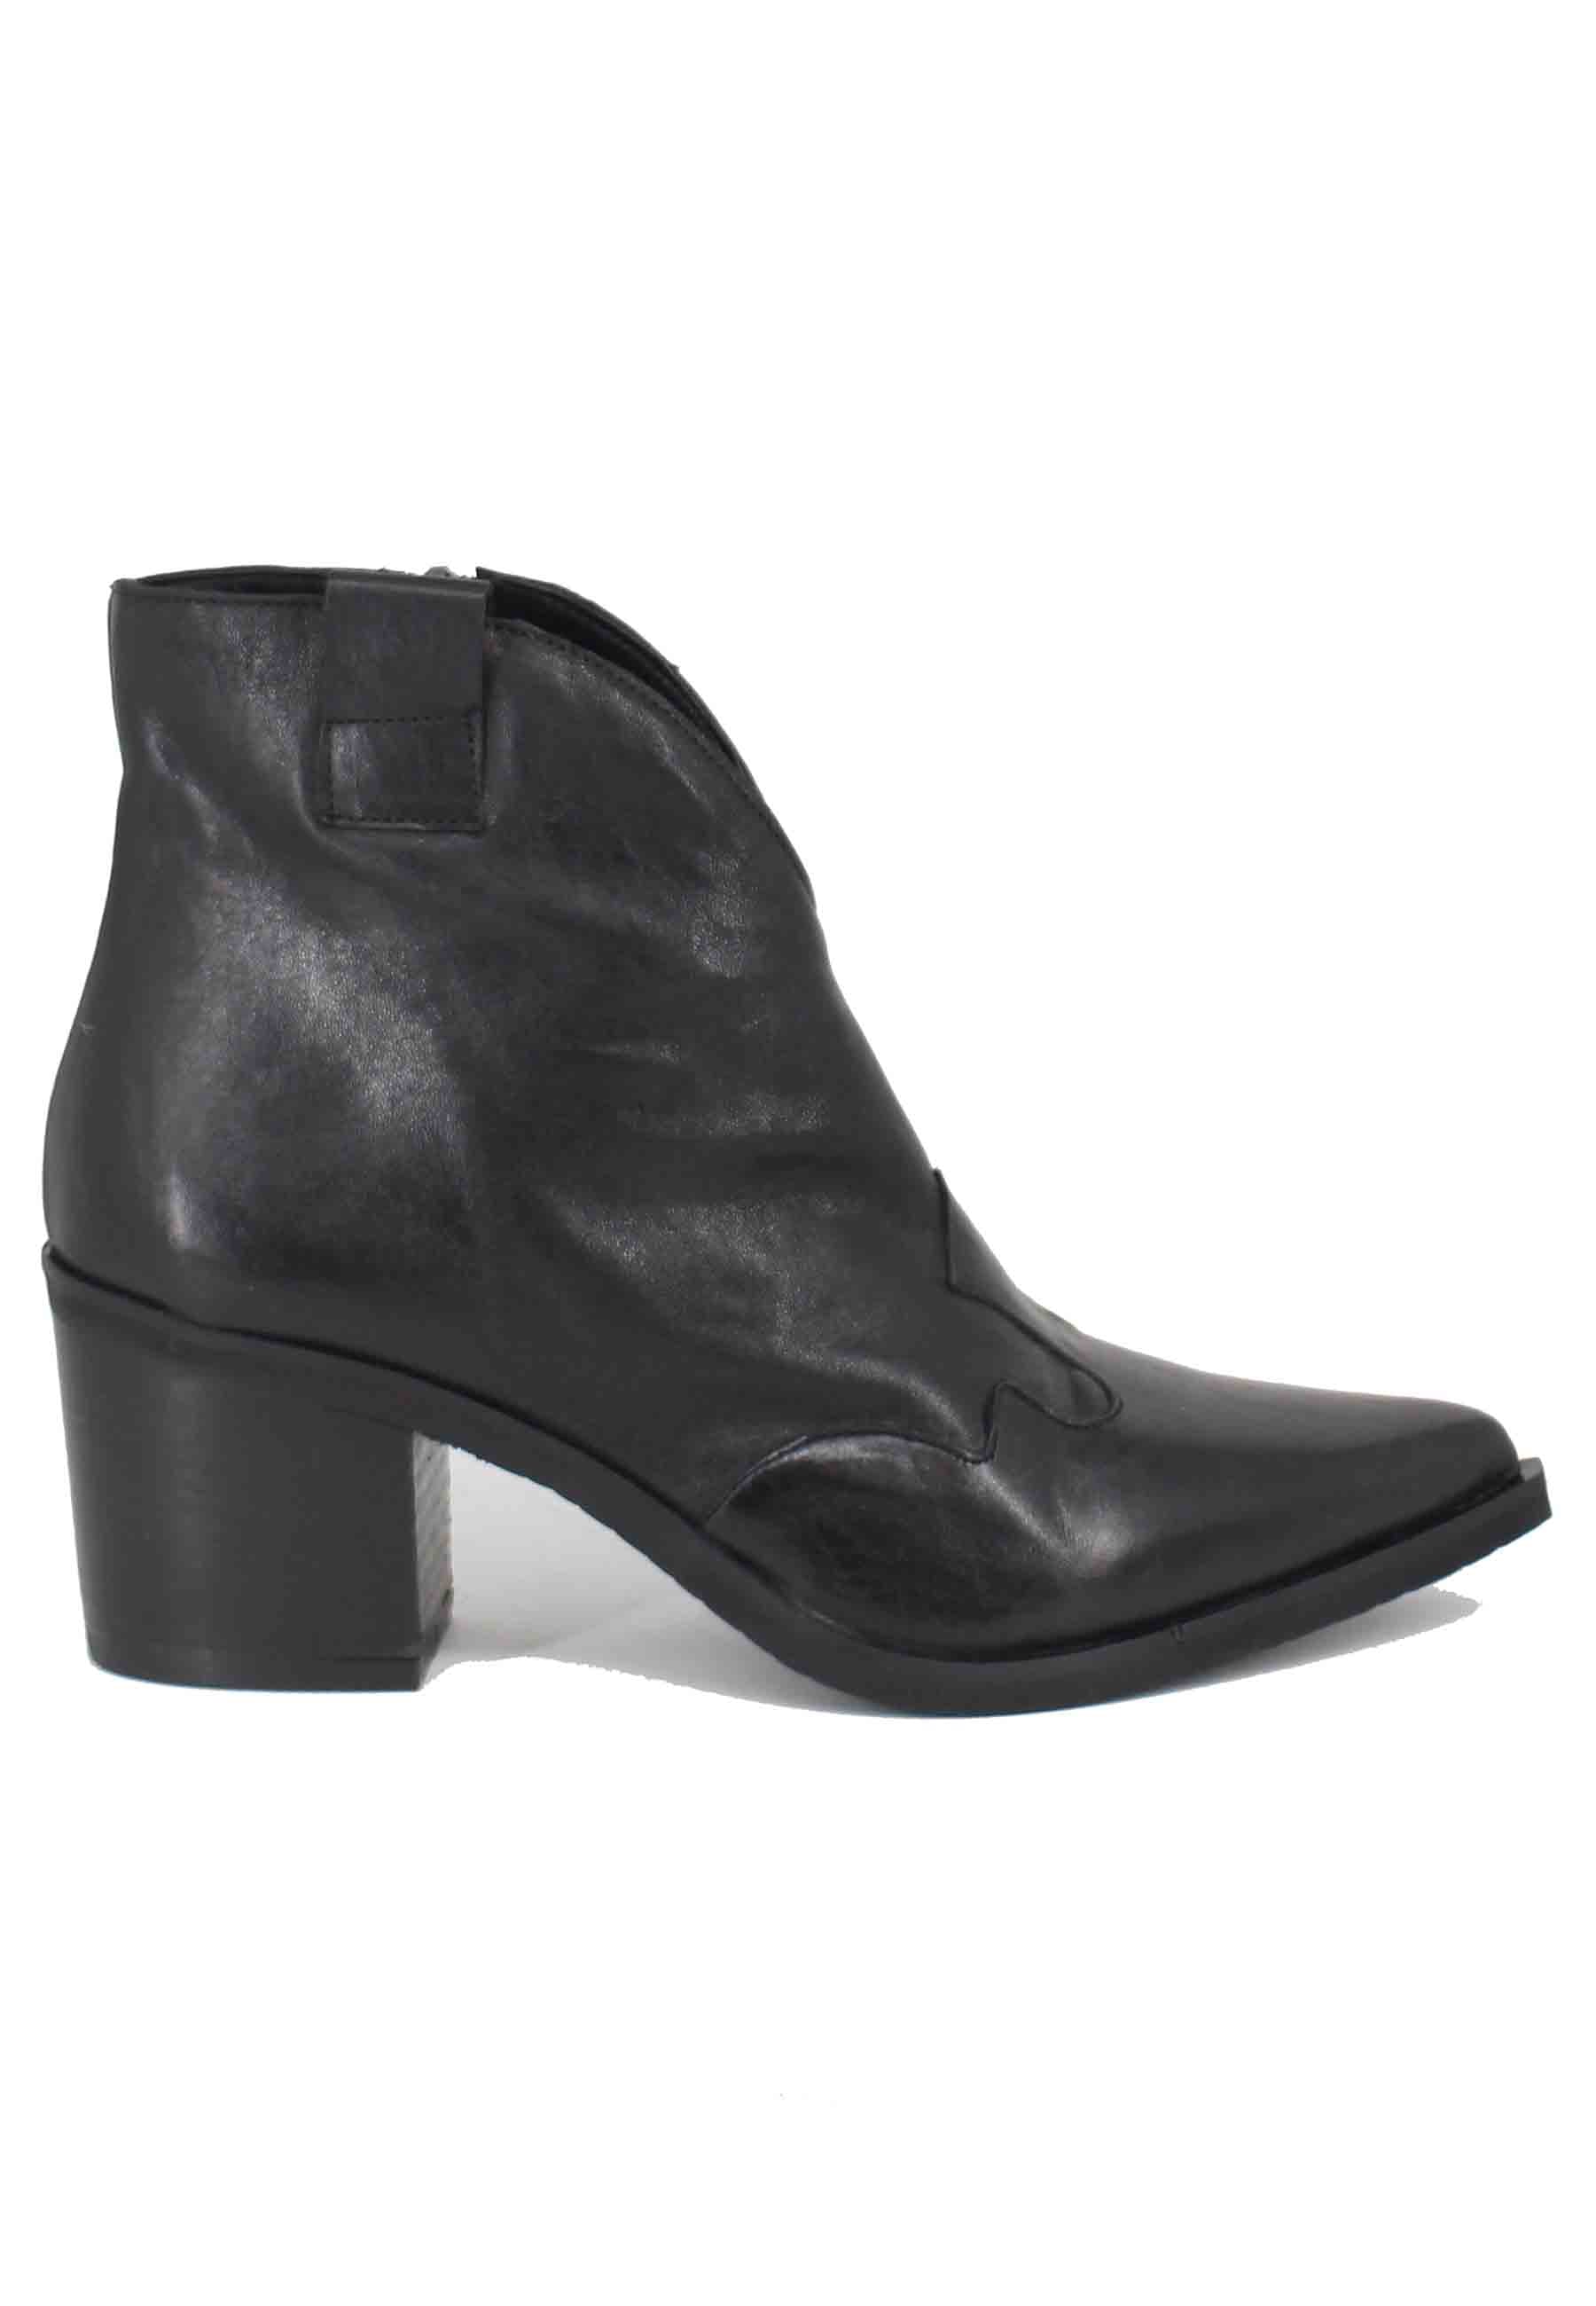 Women's Texan boots in black leather with pointed toe